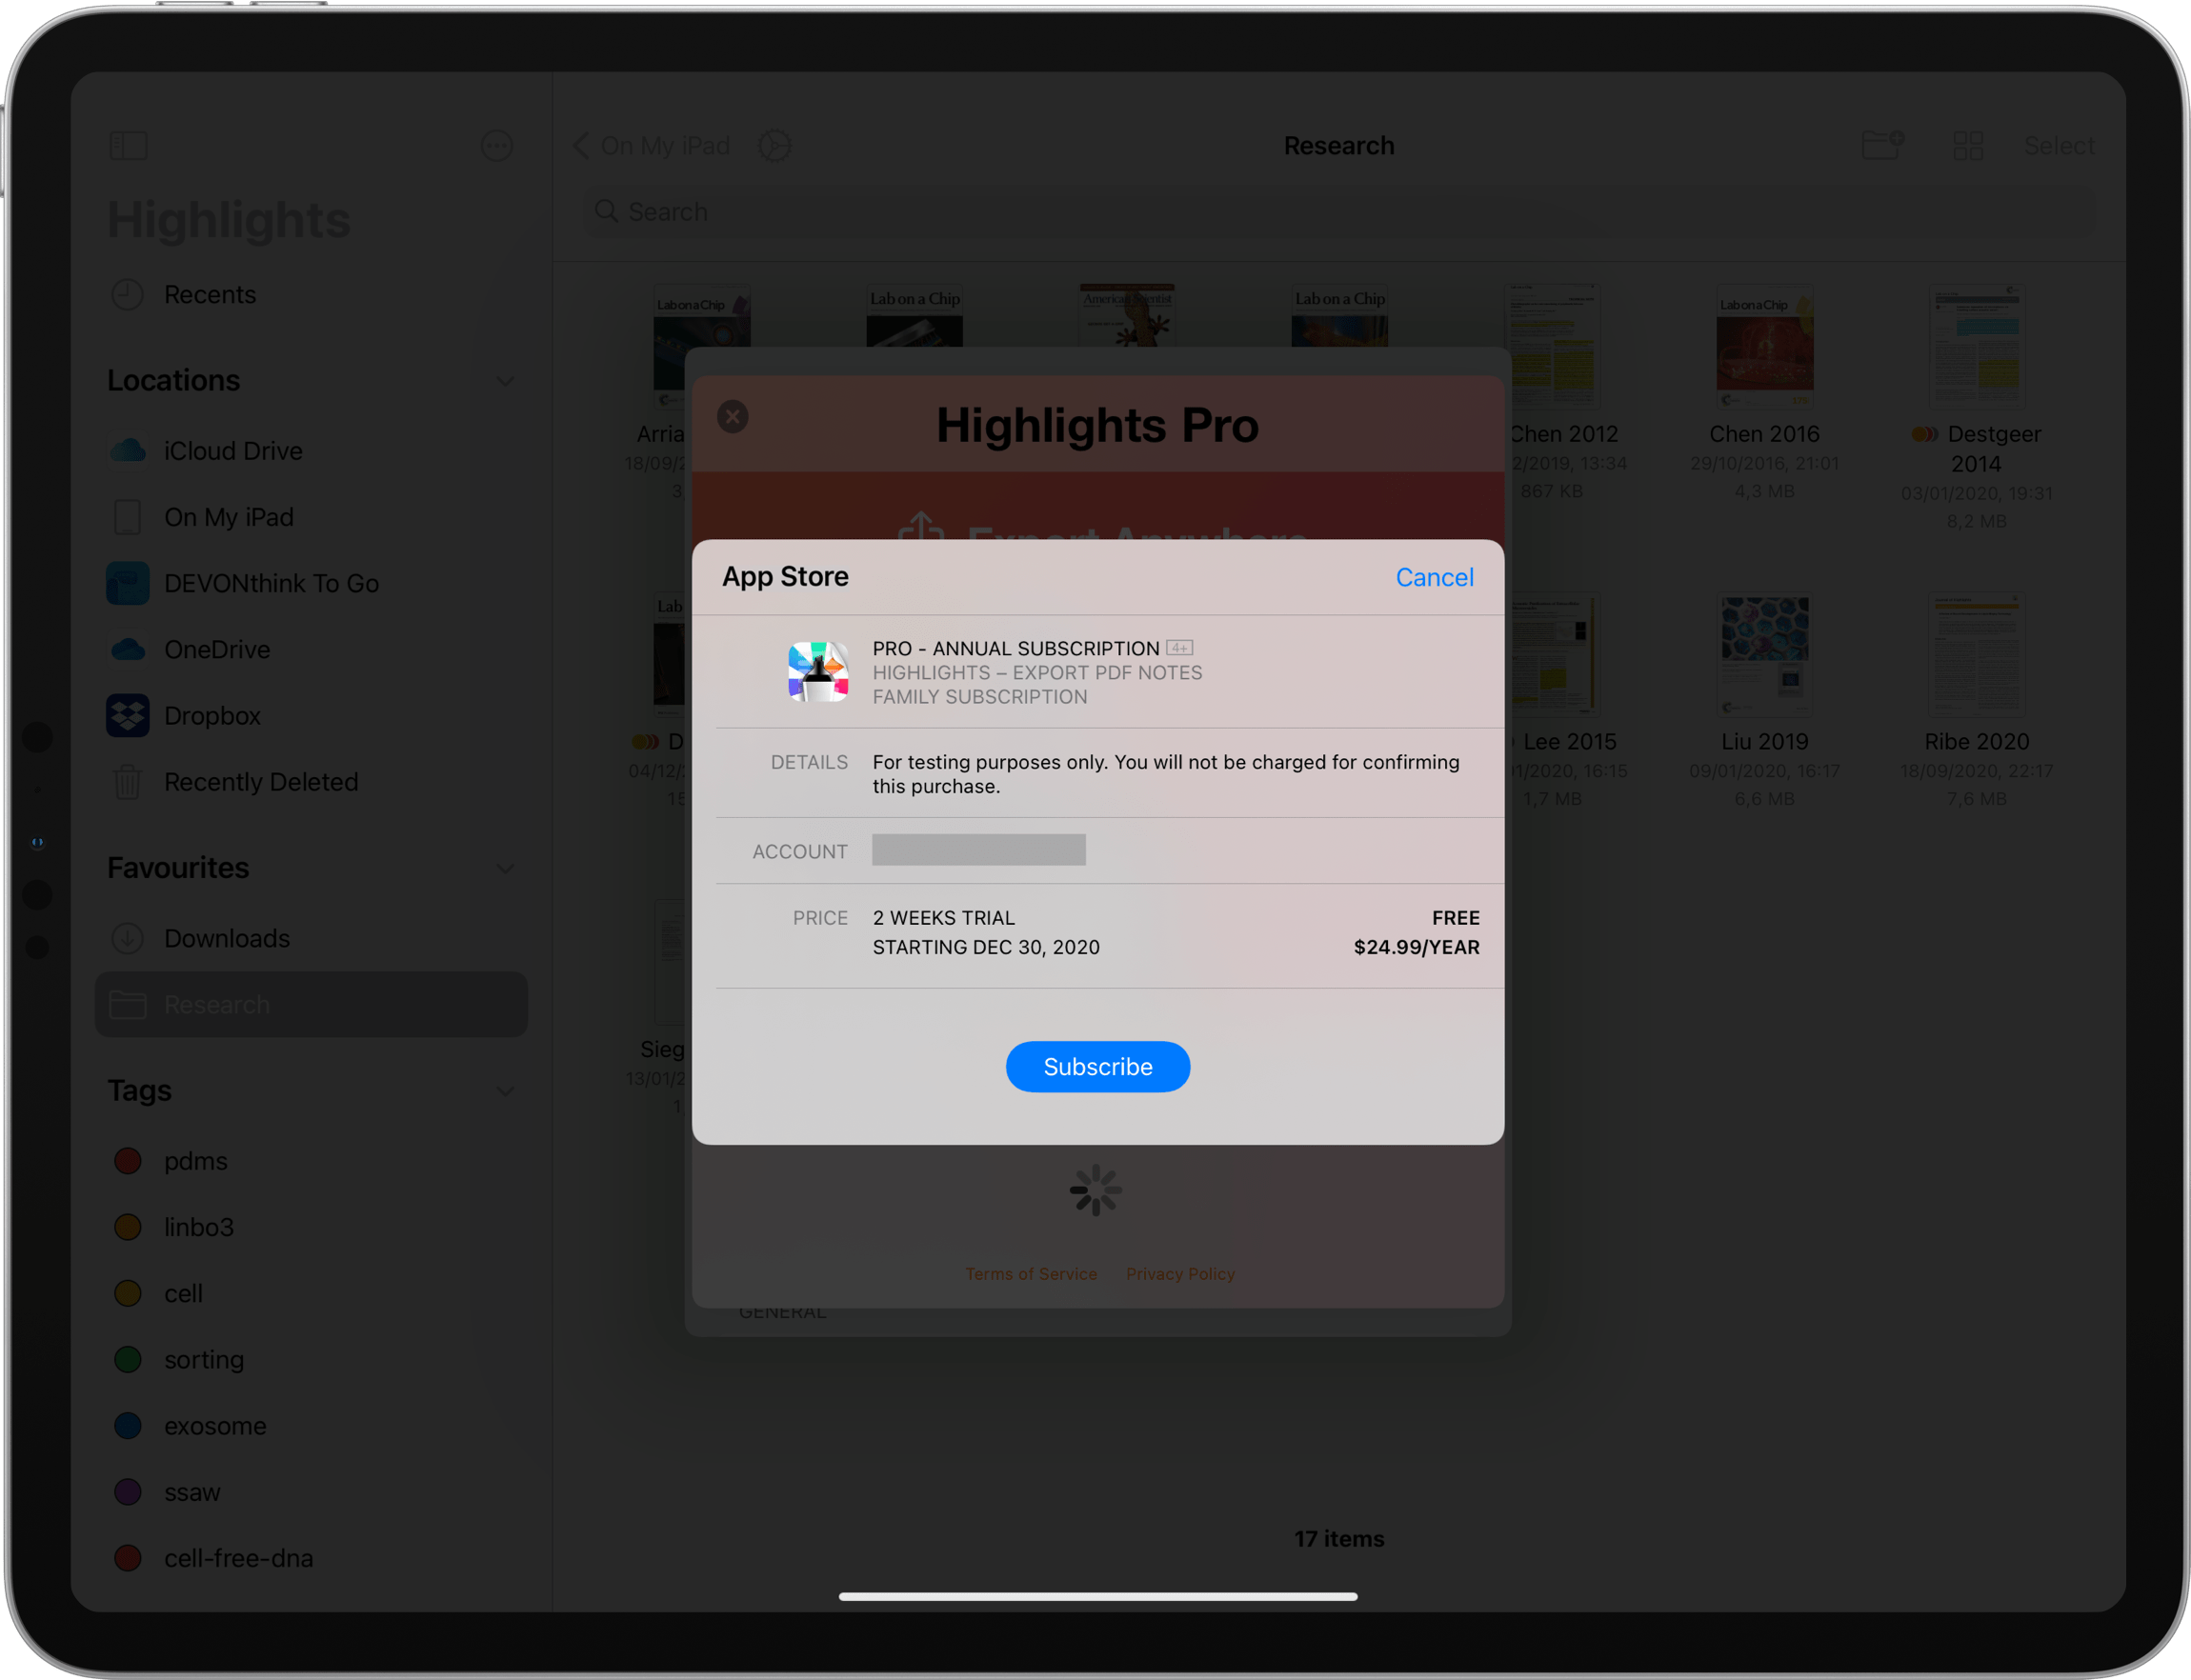 iPad displaying App Store purchase sheet for Highlights Pro